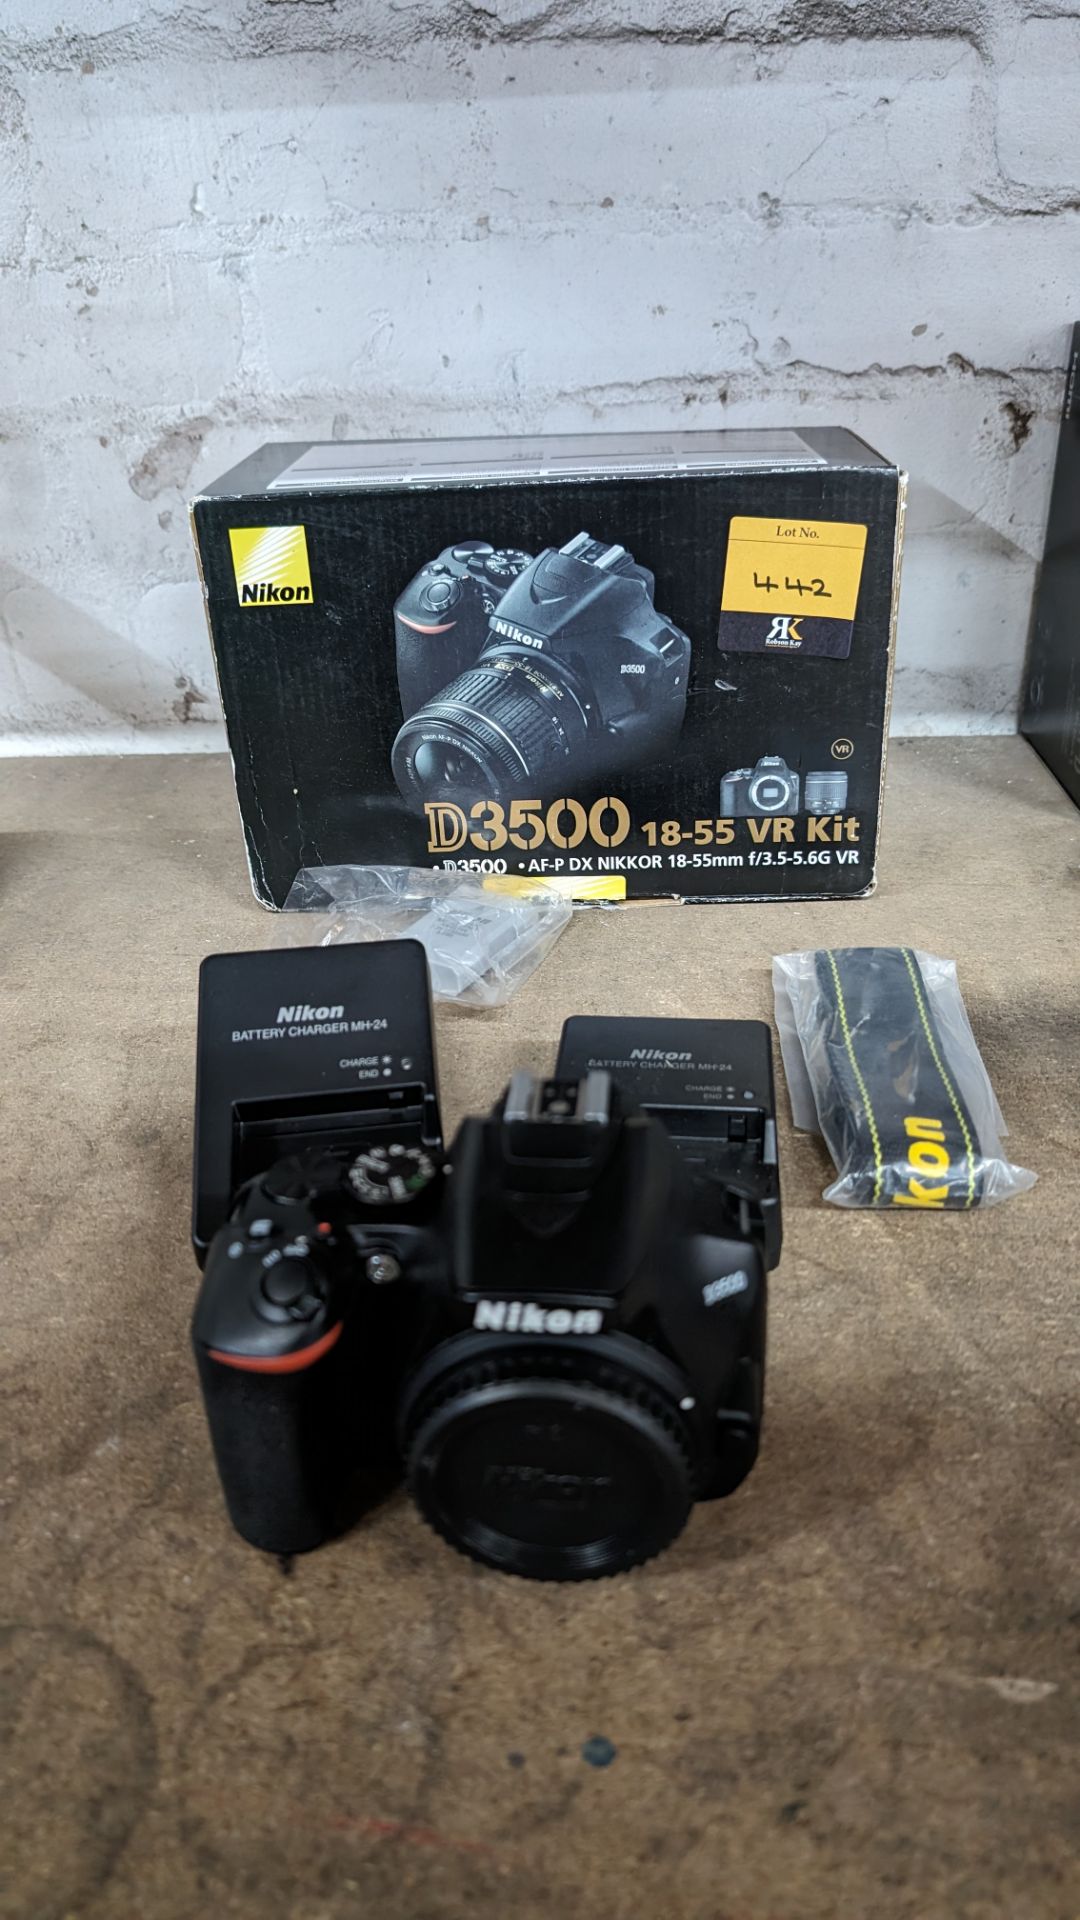 Nikon D3500 camera. Although this camera is in a box for a kit including a lens, this lot just comp - Image 8 of 8